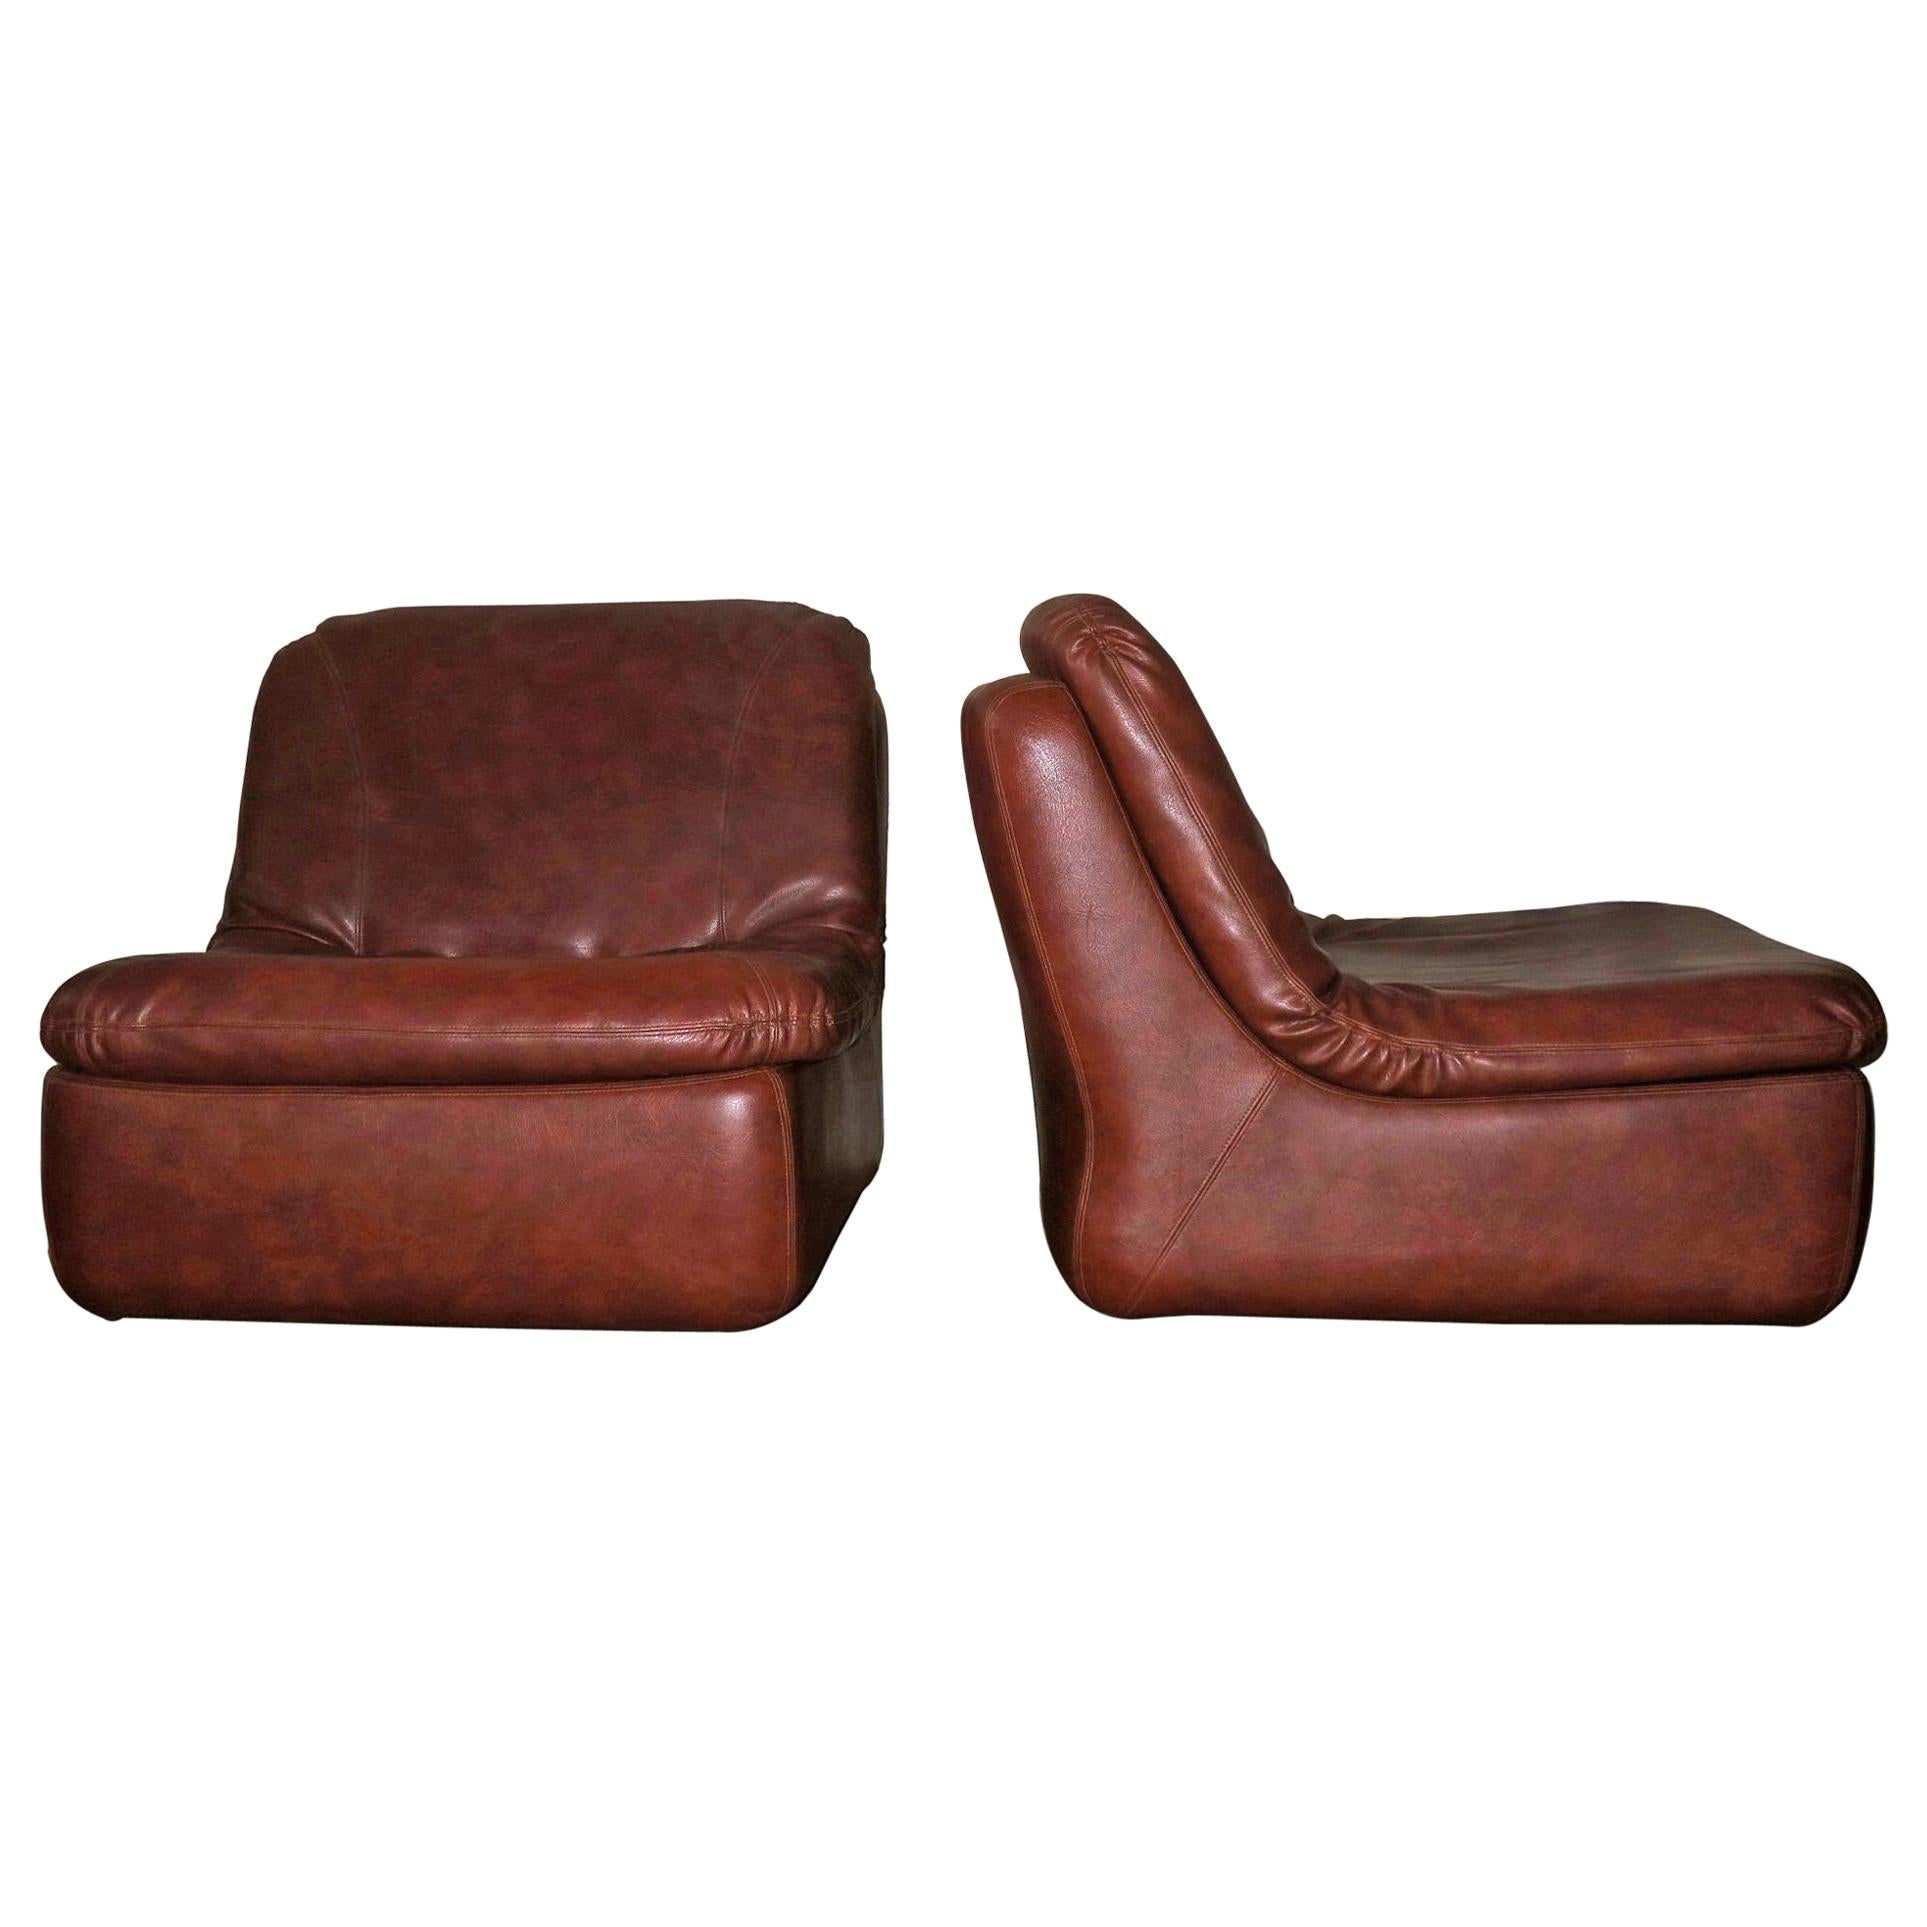 Midcentury Pair of Modular Sofa Elements in Brown Leather For Sale